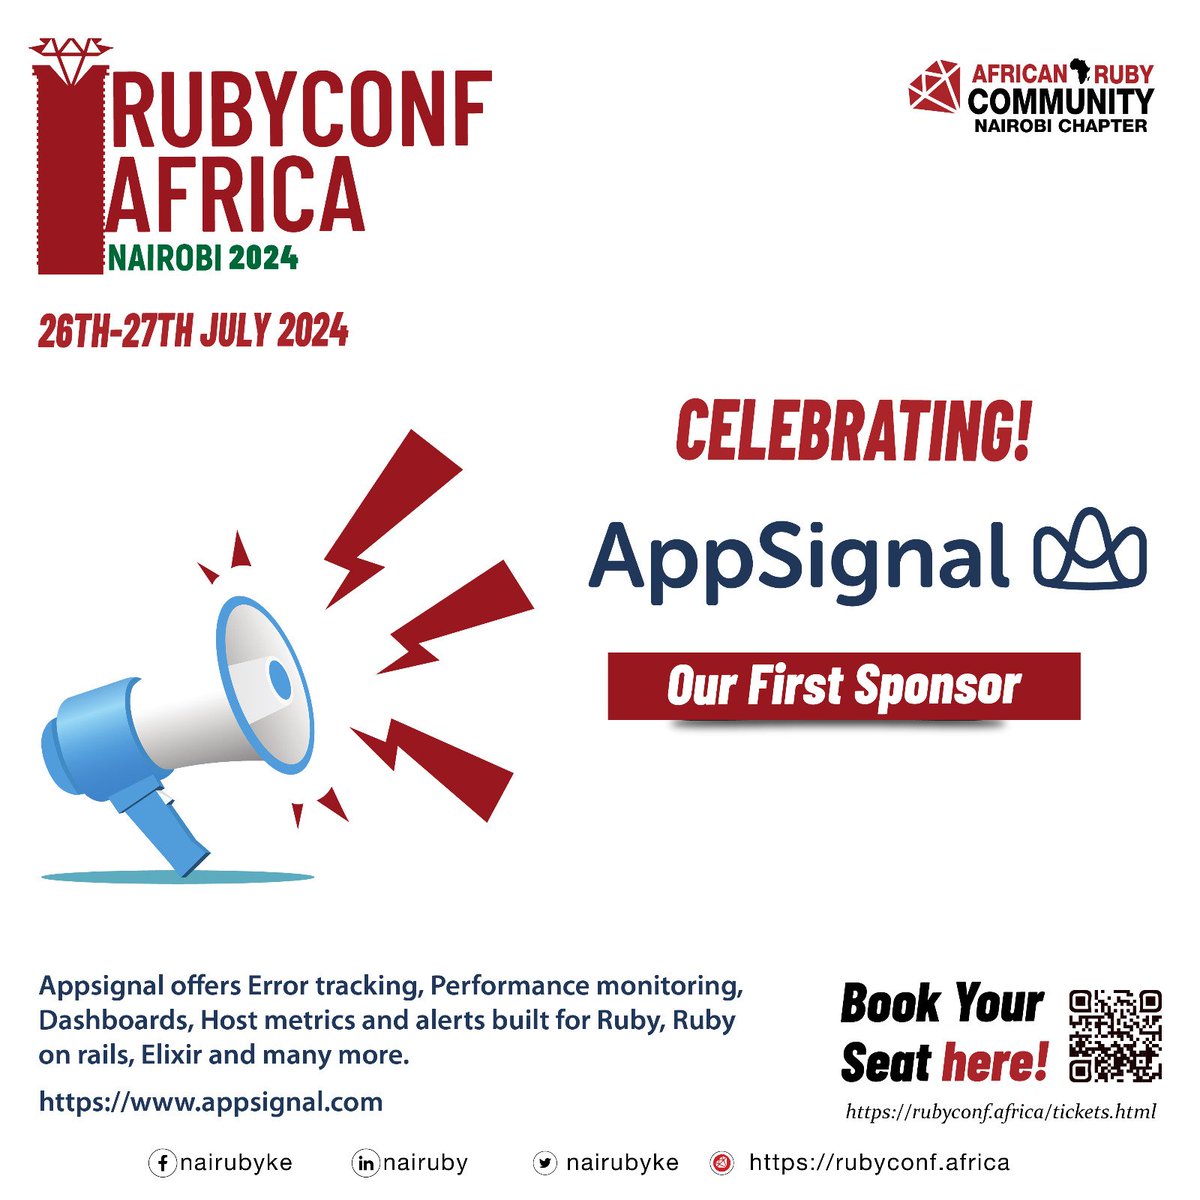 🎉 We're excited to announce @AppSignal as a sponsor for RubyConf Africa 2024 🥳💎! Join us on July 26-27 for an unforgettable conference experience. Huge thanks for their support! 🚀🌍 check them out! 👀 appsignal.com #africanruby #rubyconfafrica2024